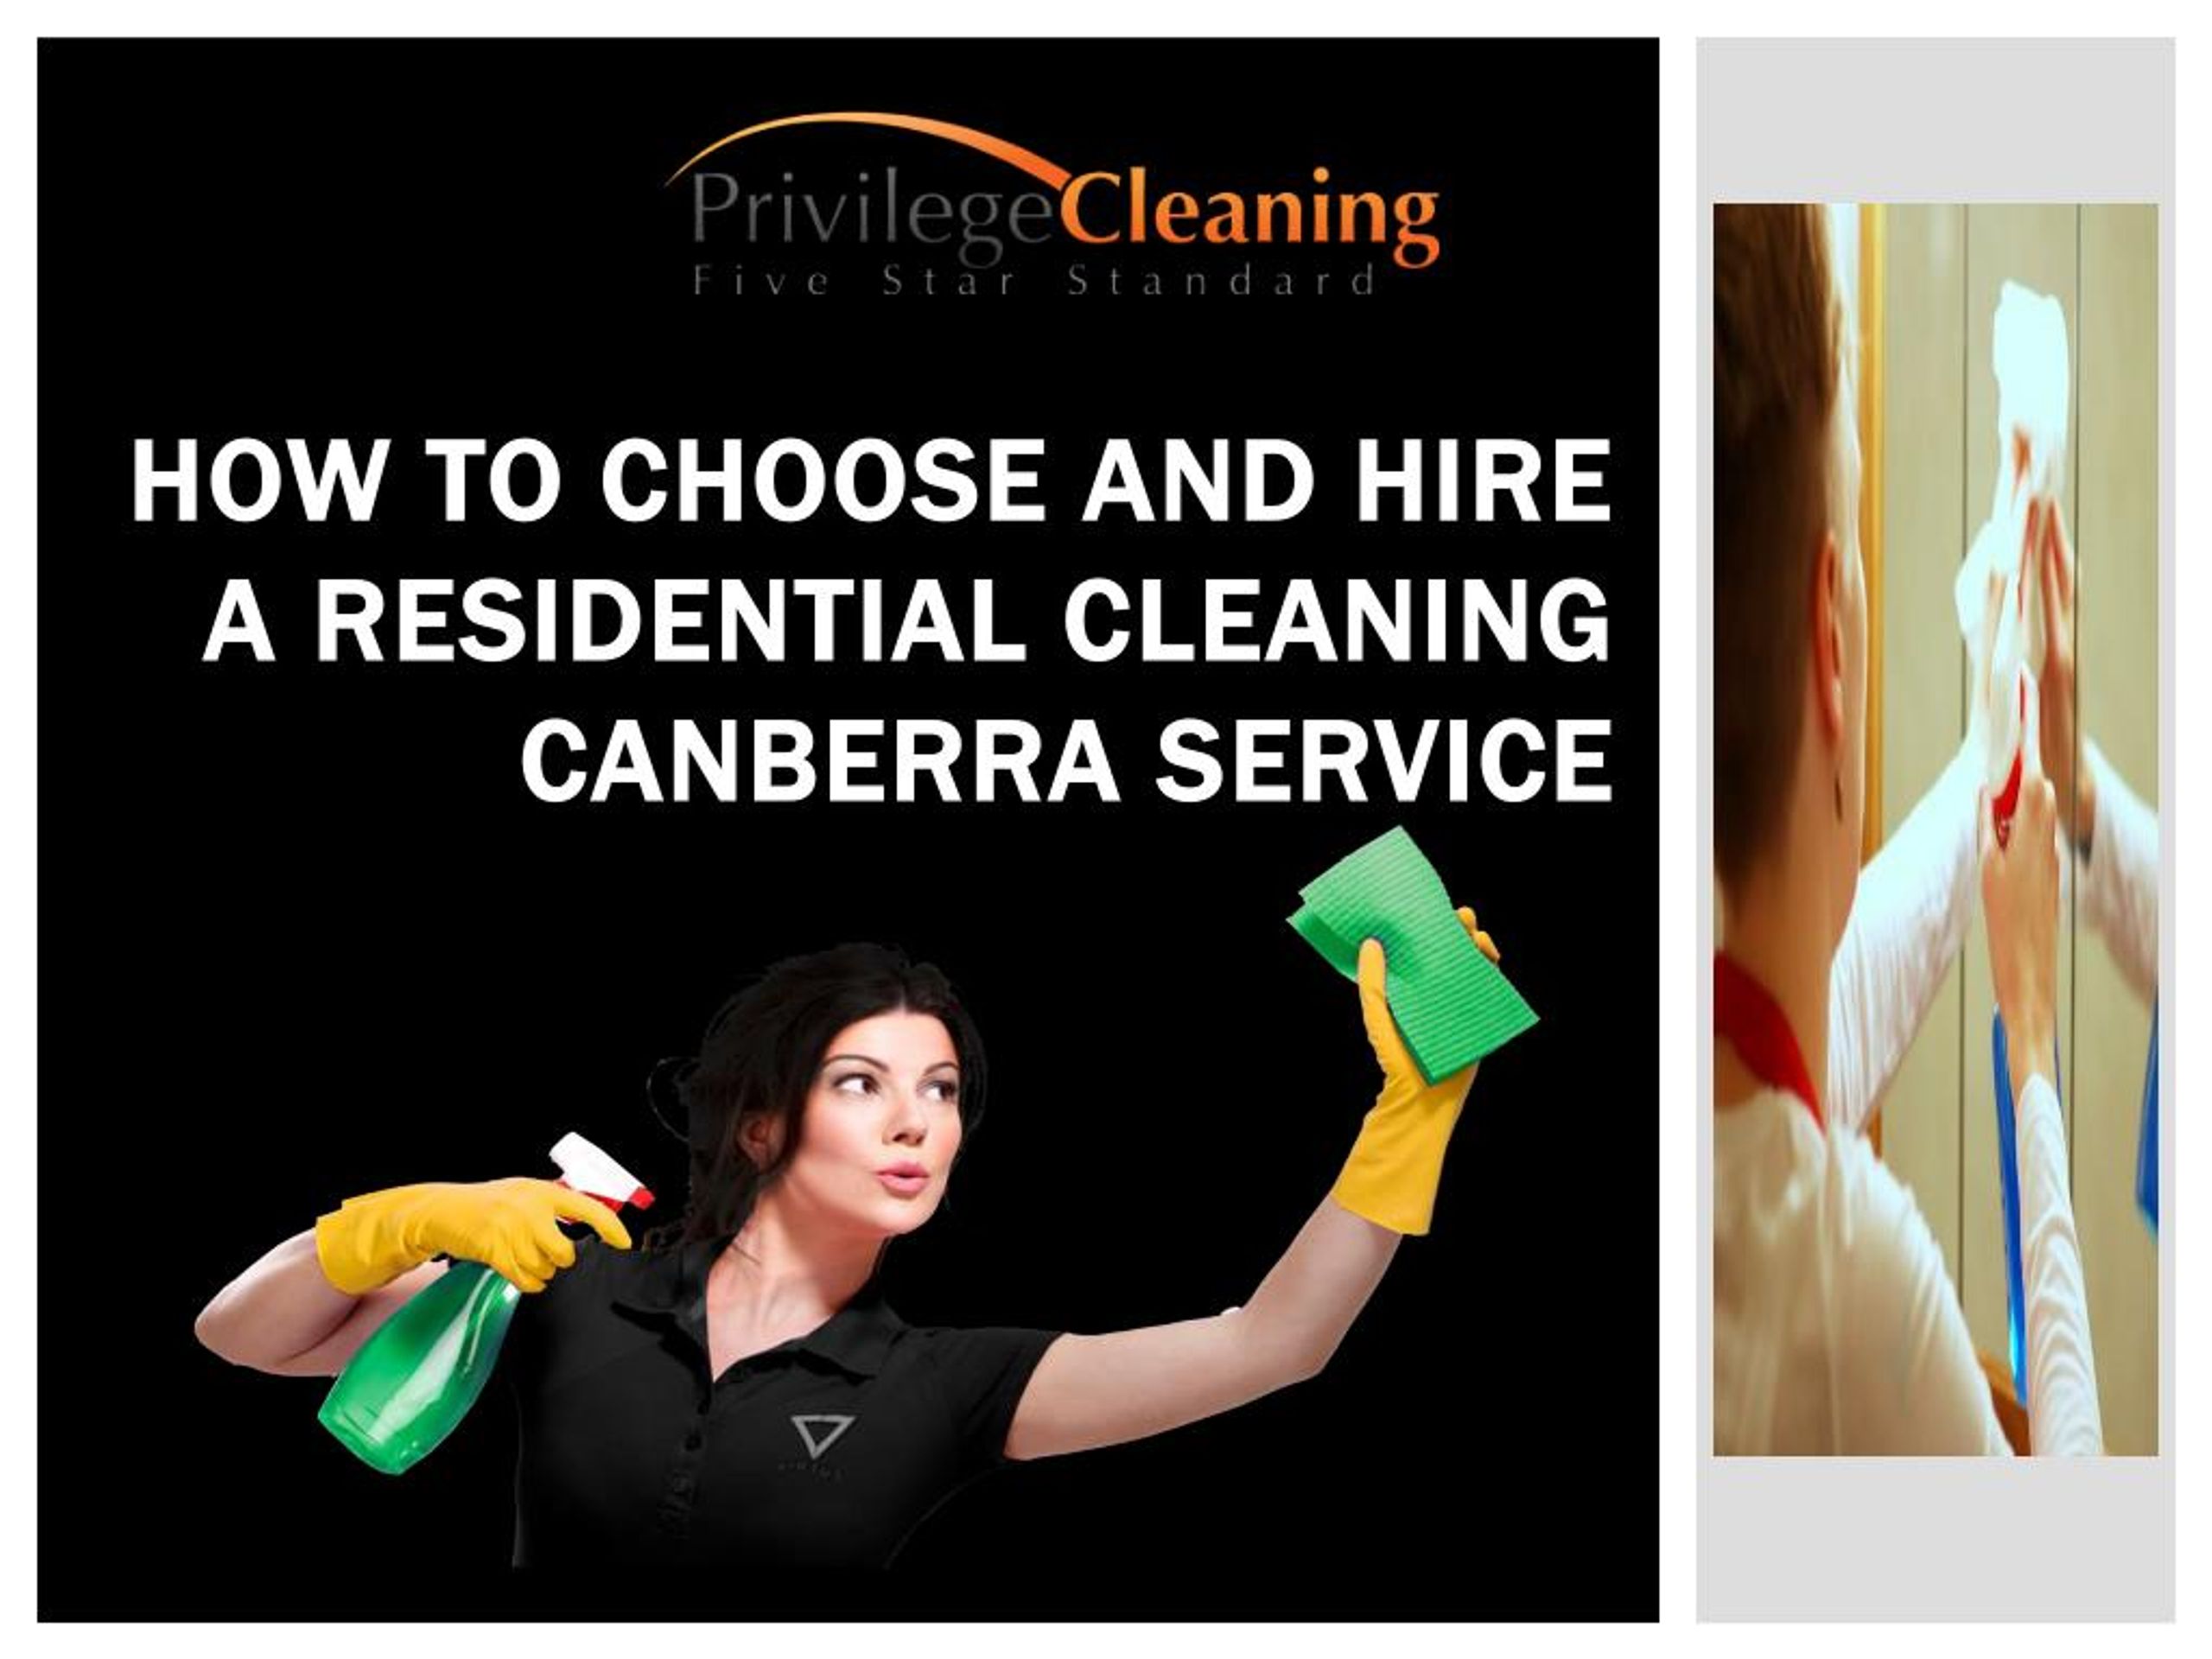 Cleaning night jobs in canberra